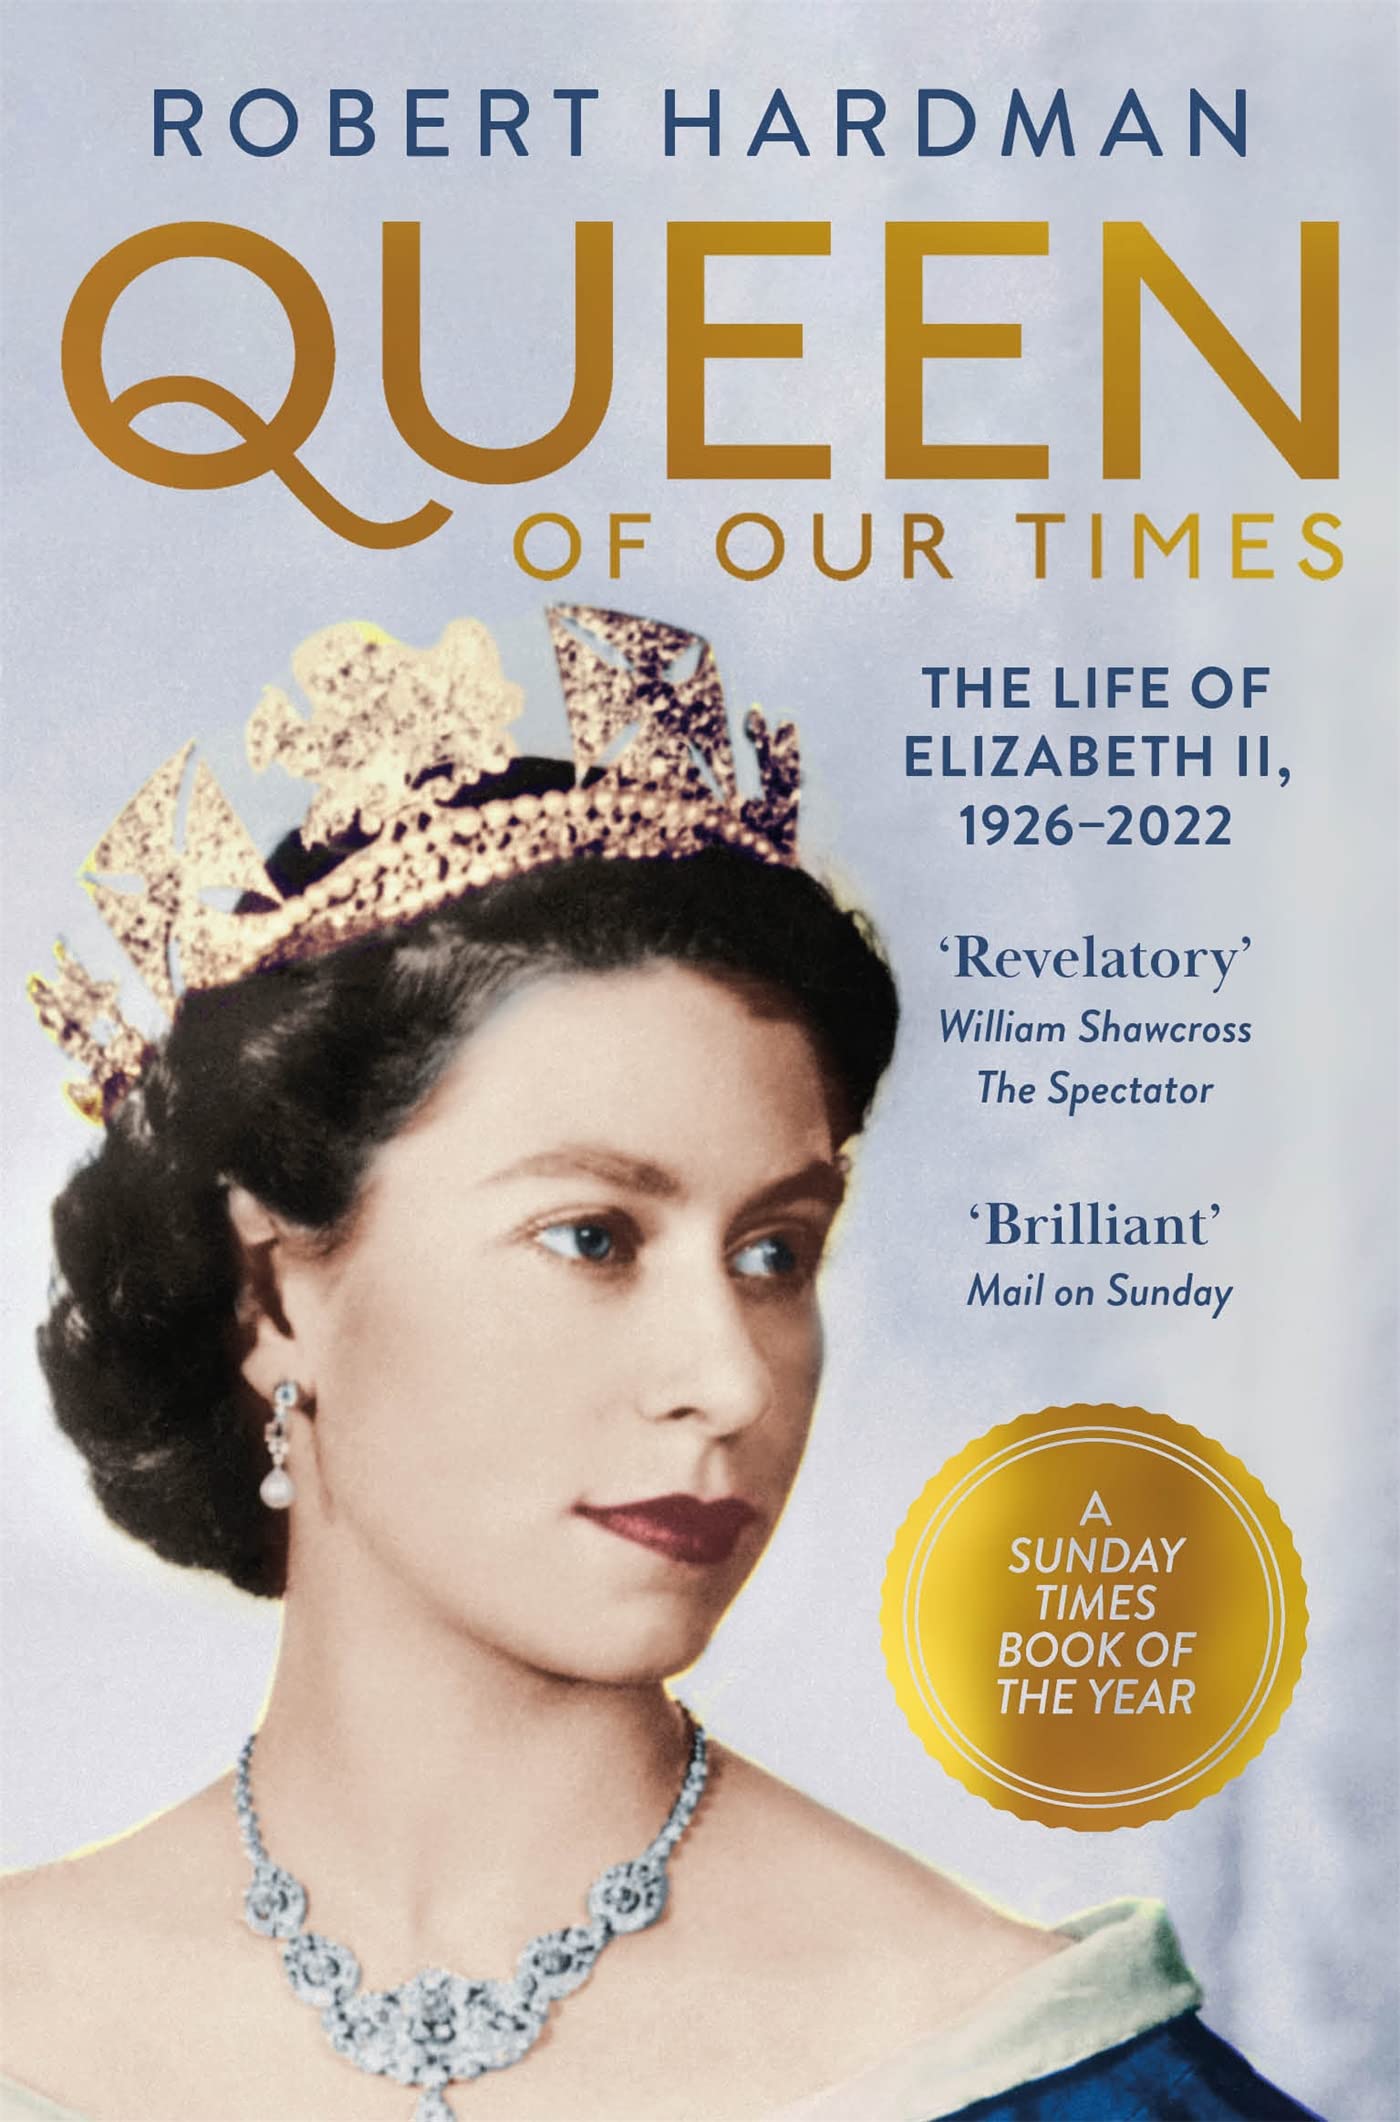 Queen_of_our_times paperback book cover